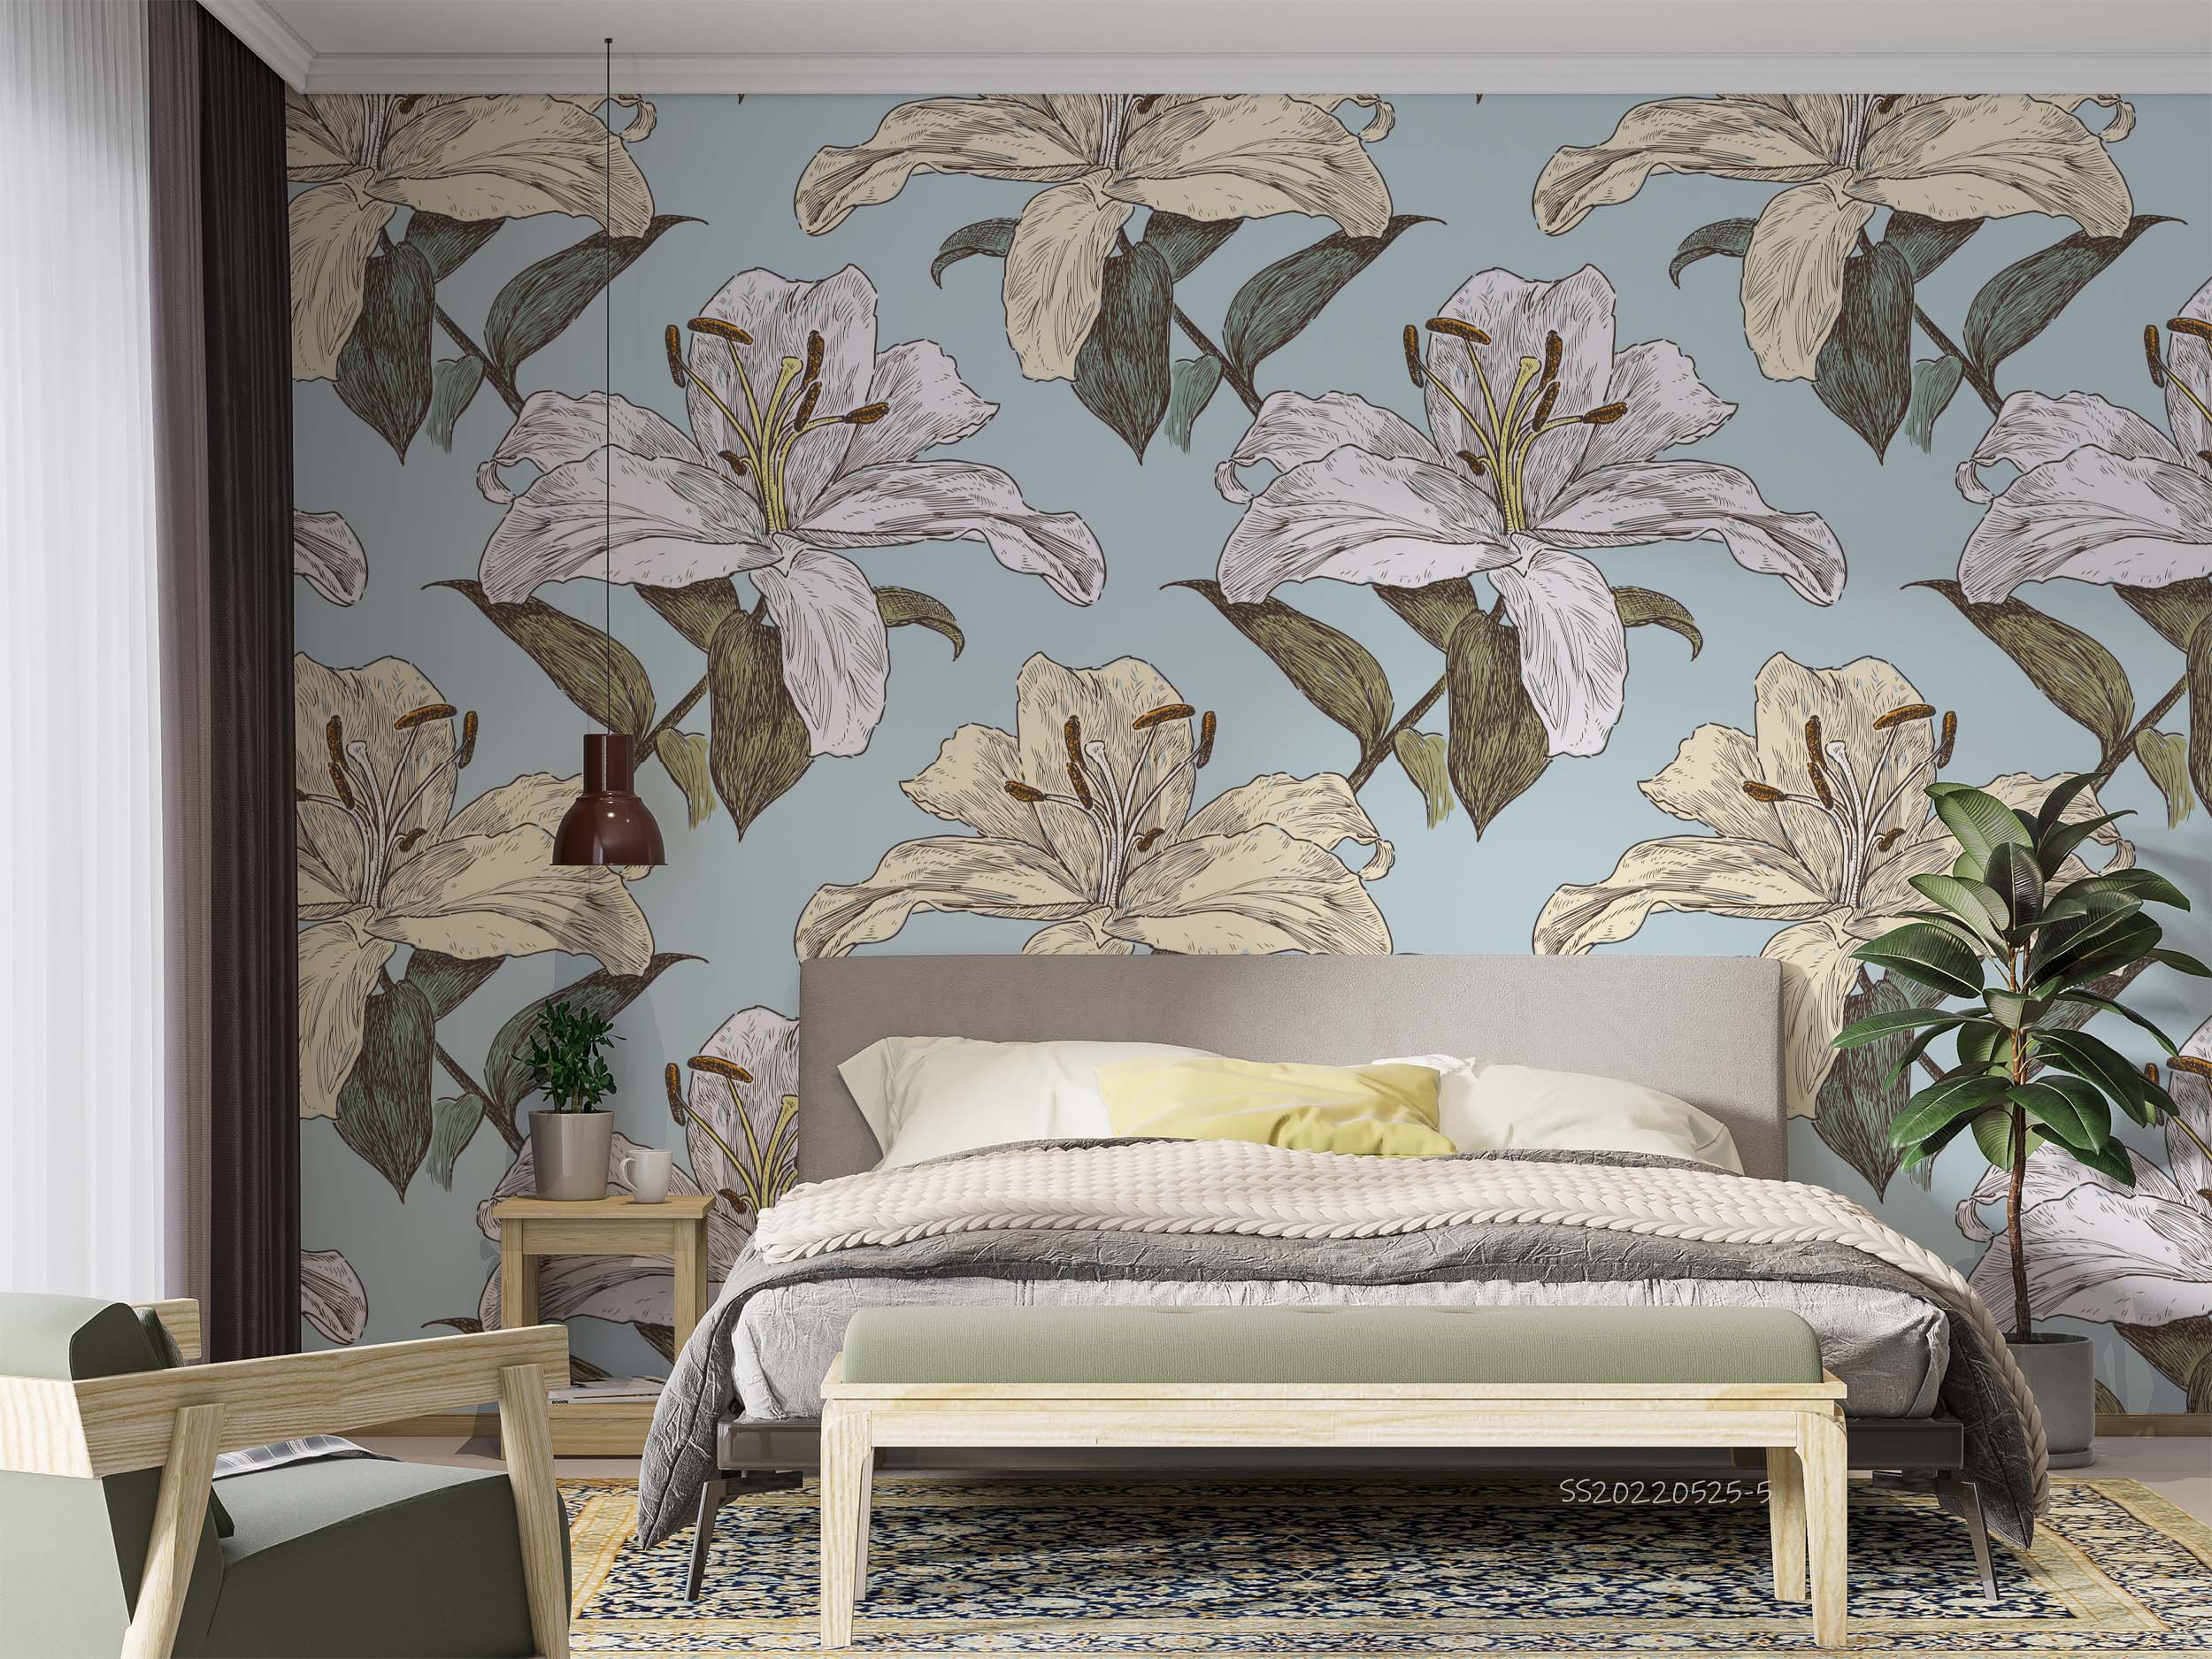 3D Vintage Watercolor Style Lily Floral Pattern Wall Mural Wallpaper GD 972- Jess Art Decoration